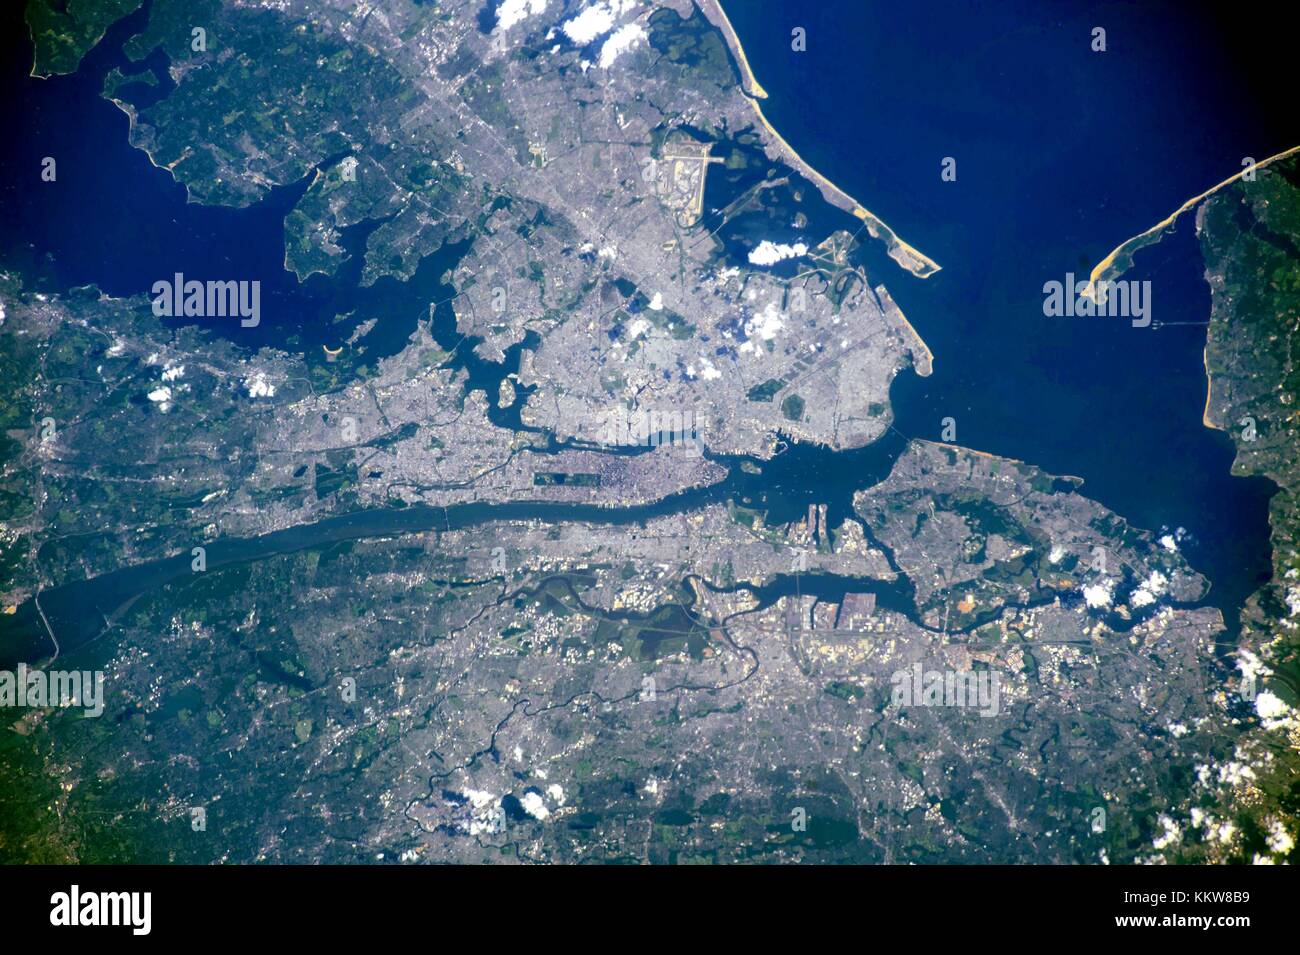 Daytime view of New York City and try-state area from the International Space Station as seen from Earth Orbit. Stock Photo